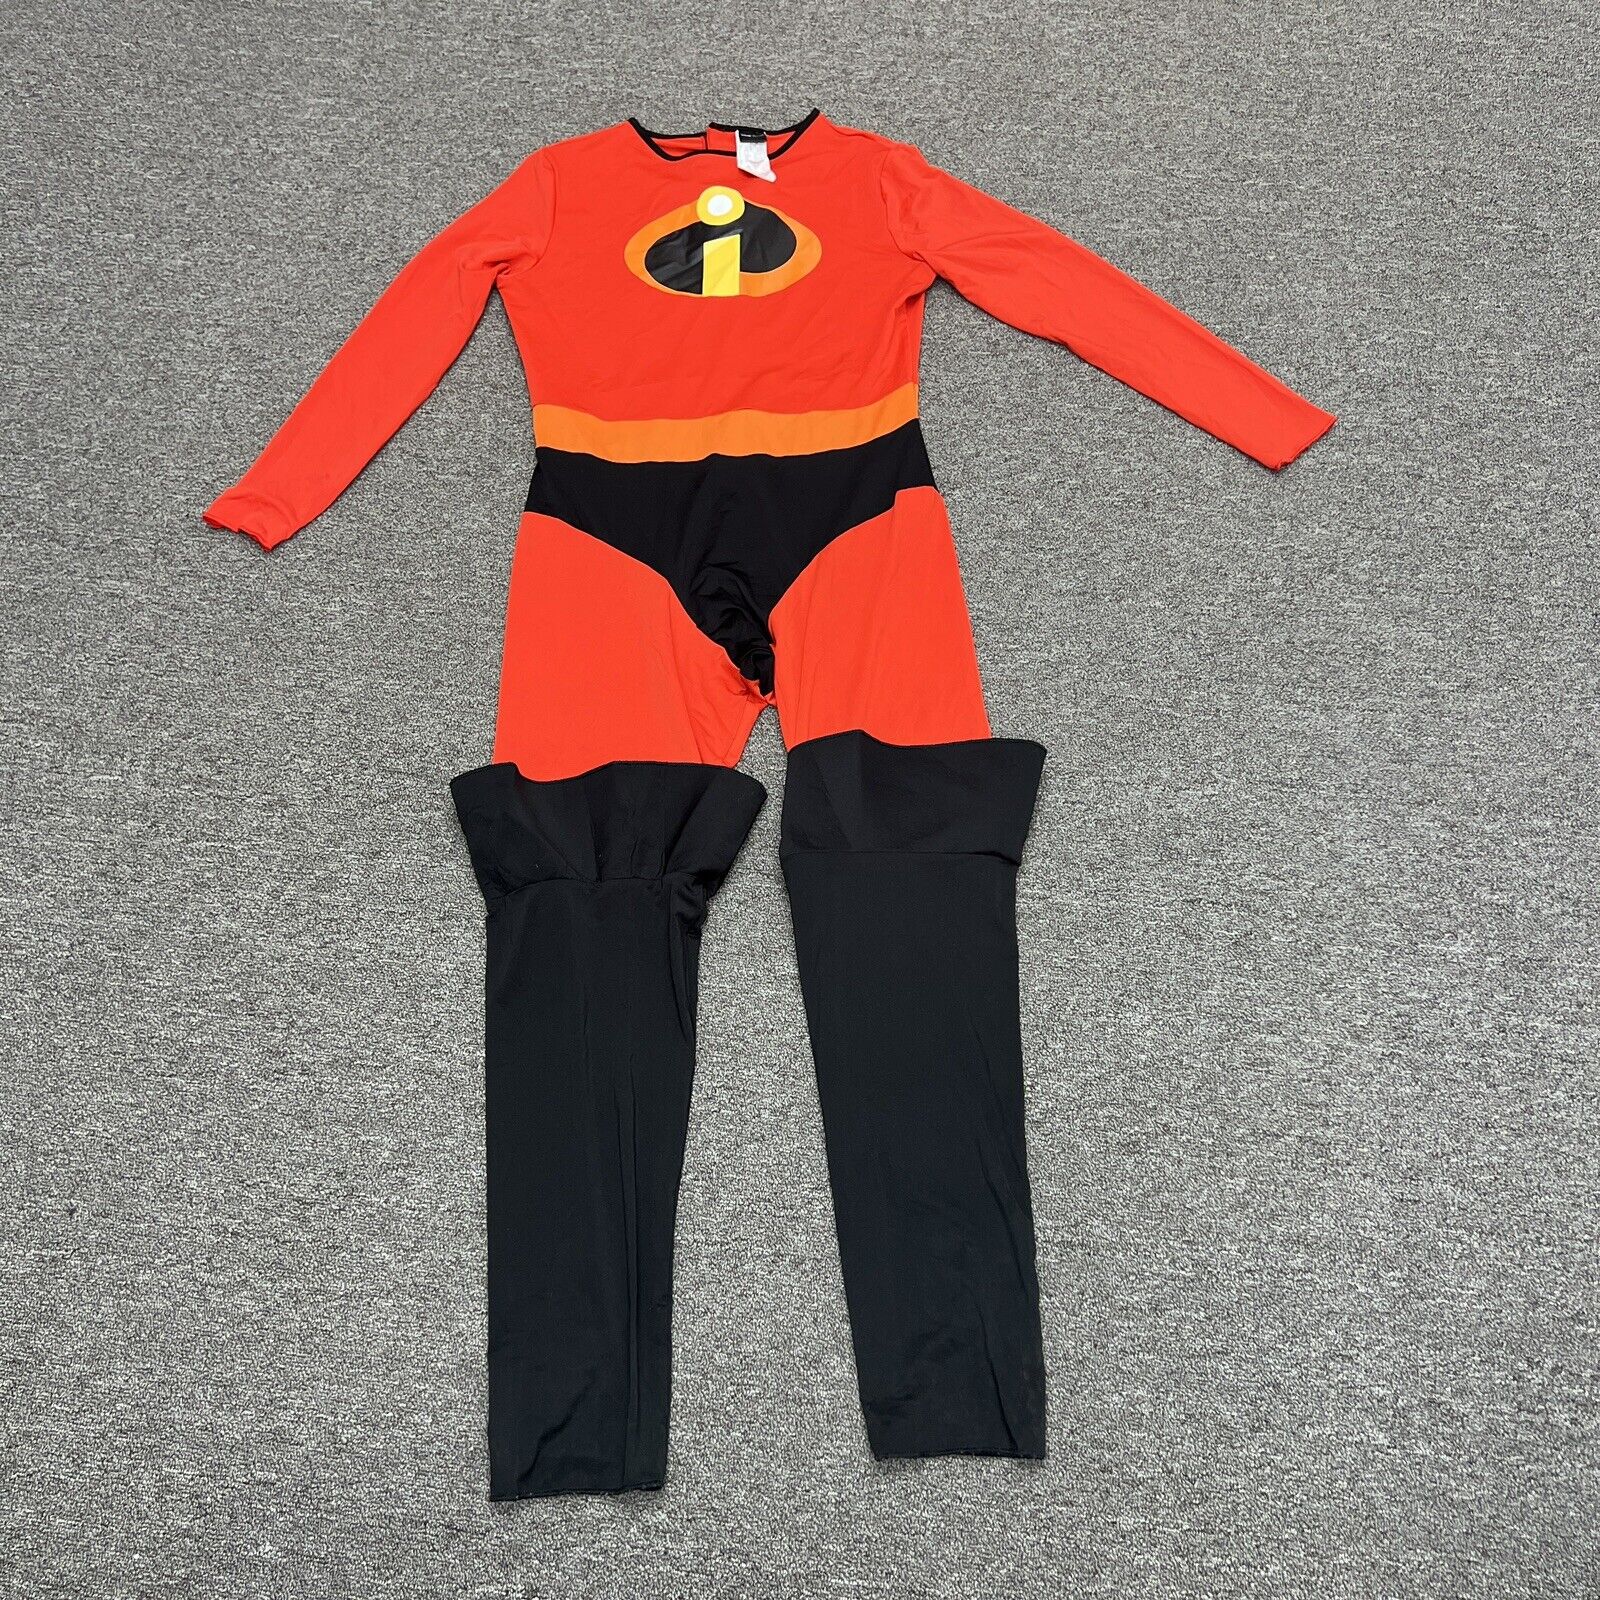 Mr. Incredible Adult Costume Size Large See Measurements